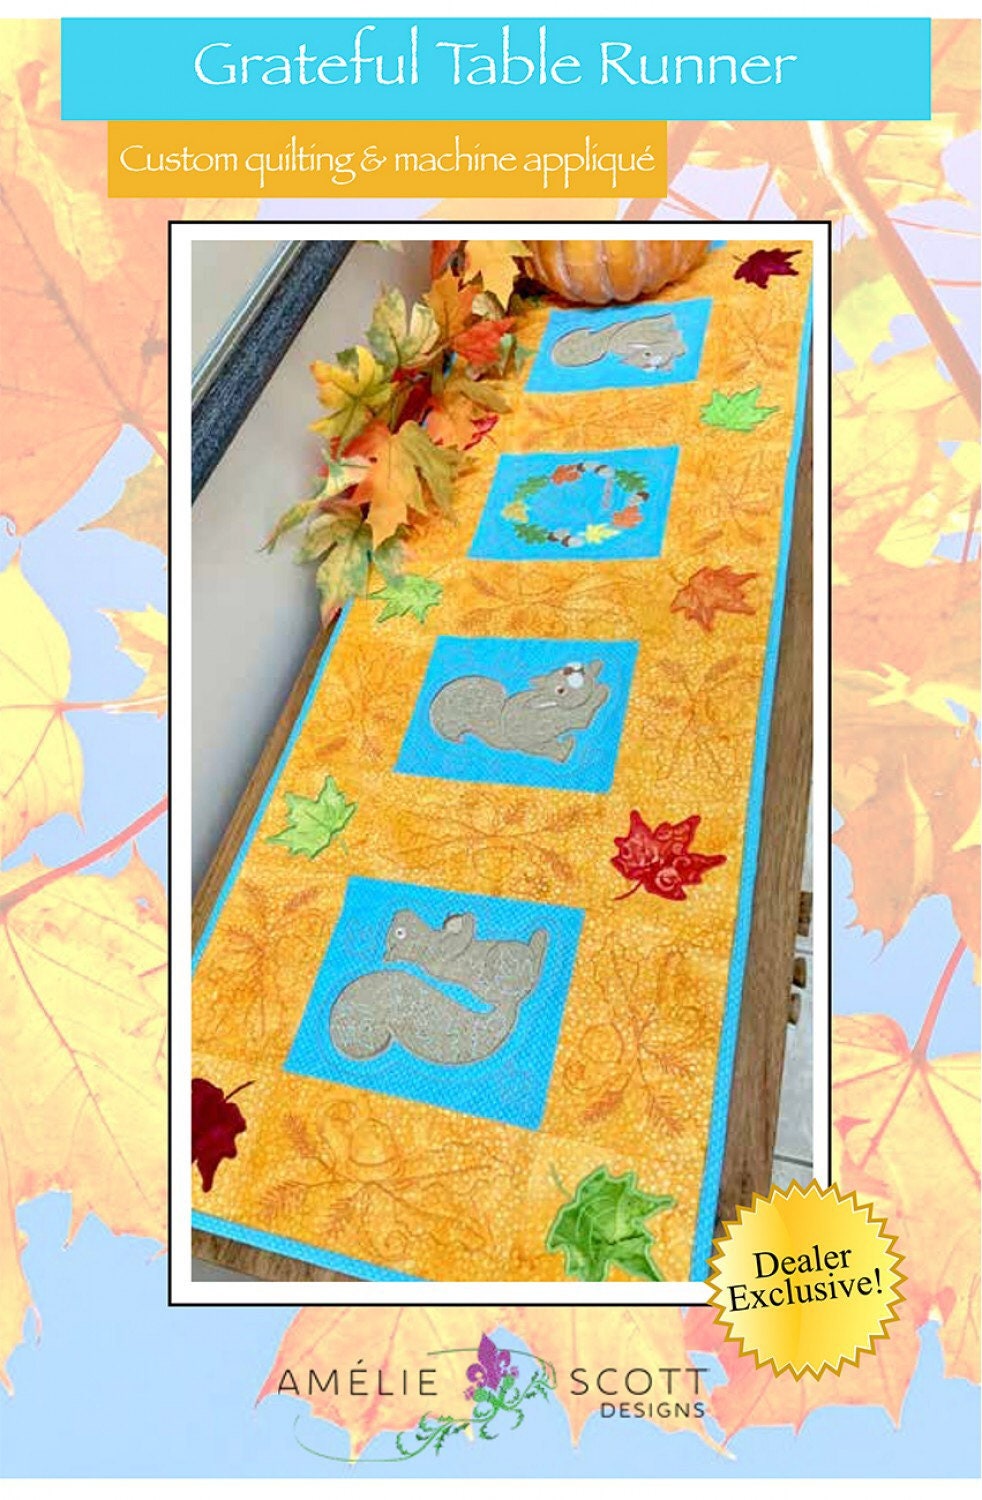 Grateful Table Runner Pattern and Embroidery CD - Amelia Scott Designs - Christine Conner - In the Hoop Piecing, Appliquéing & Quilting